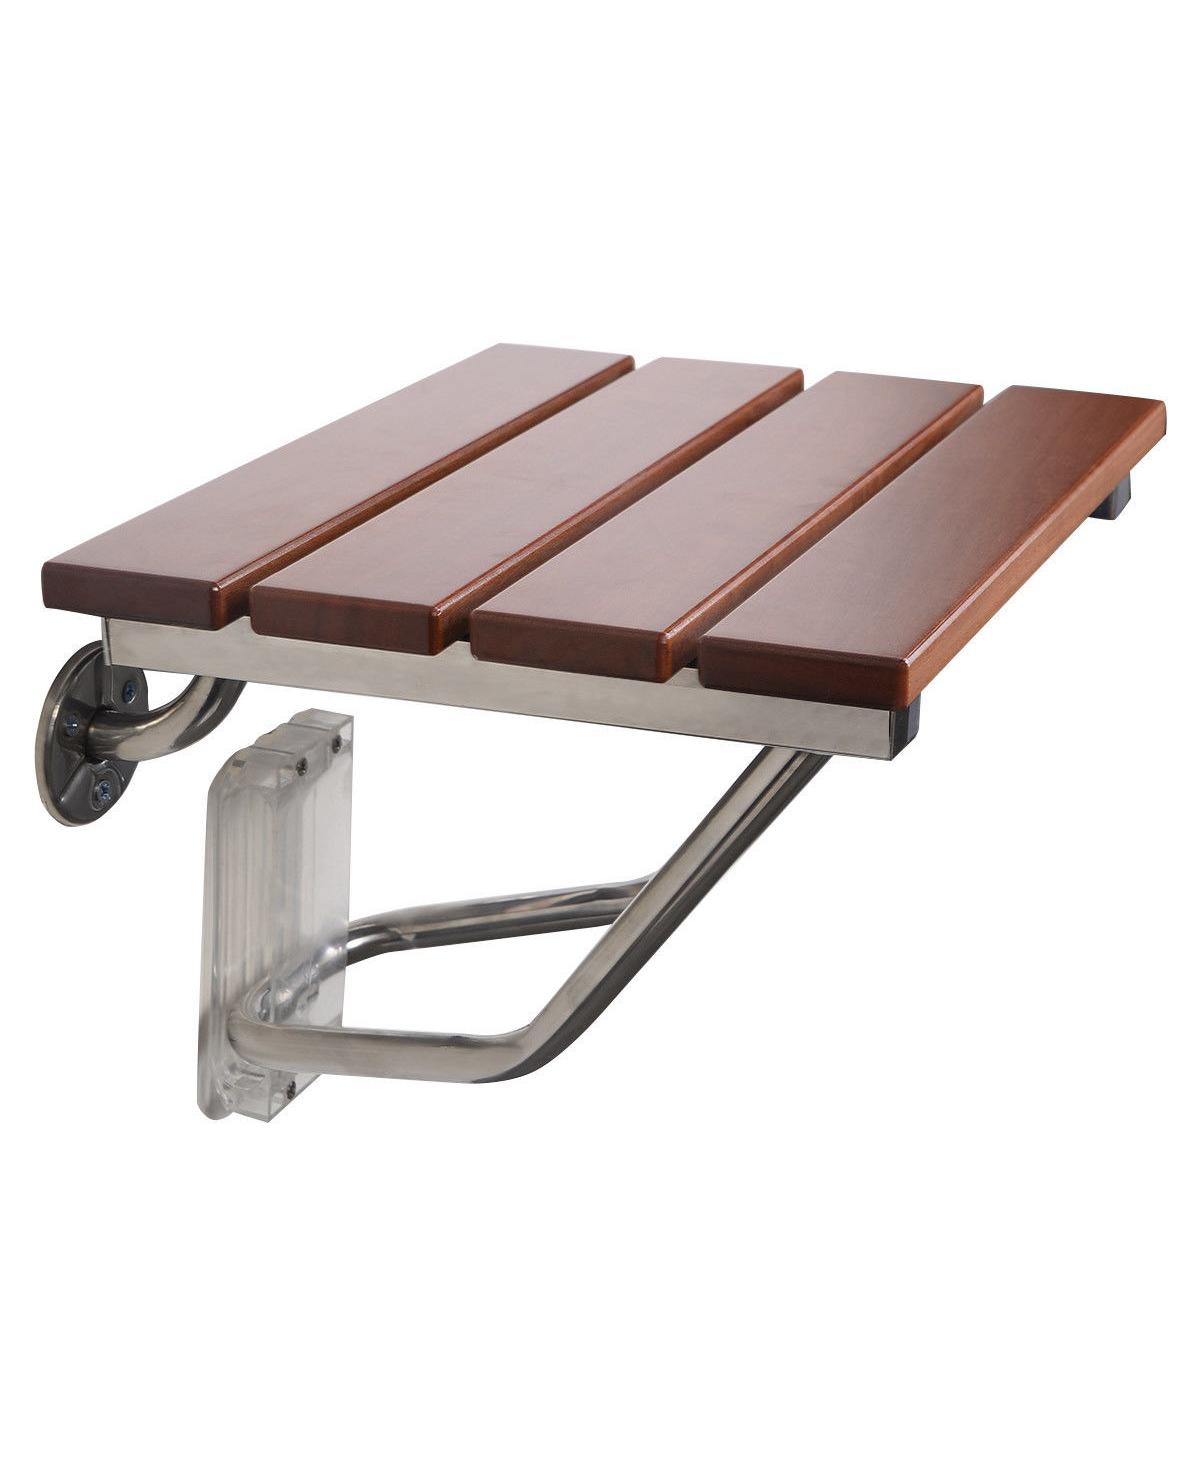 Folding Bath Seat Bench Shower Chair Wall Mount Solid Wood Construction - Brown